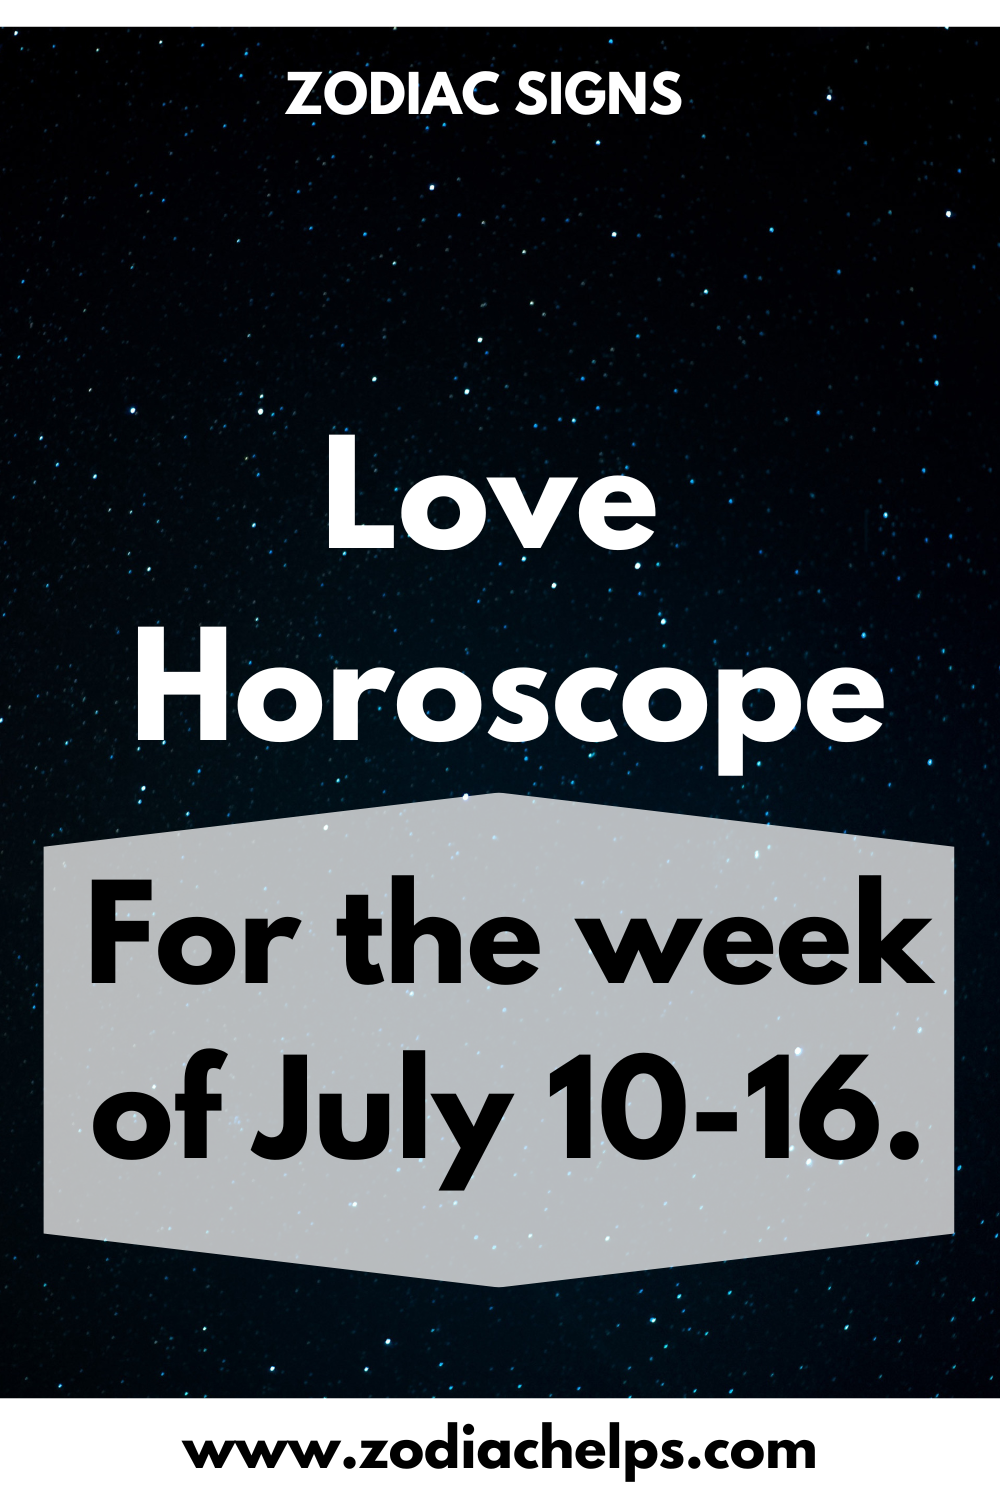 Love horoscope for the week of July 10-16.